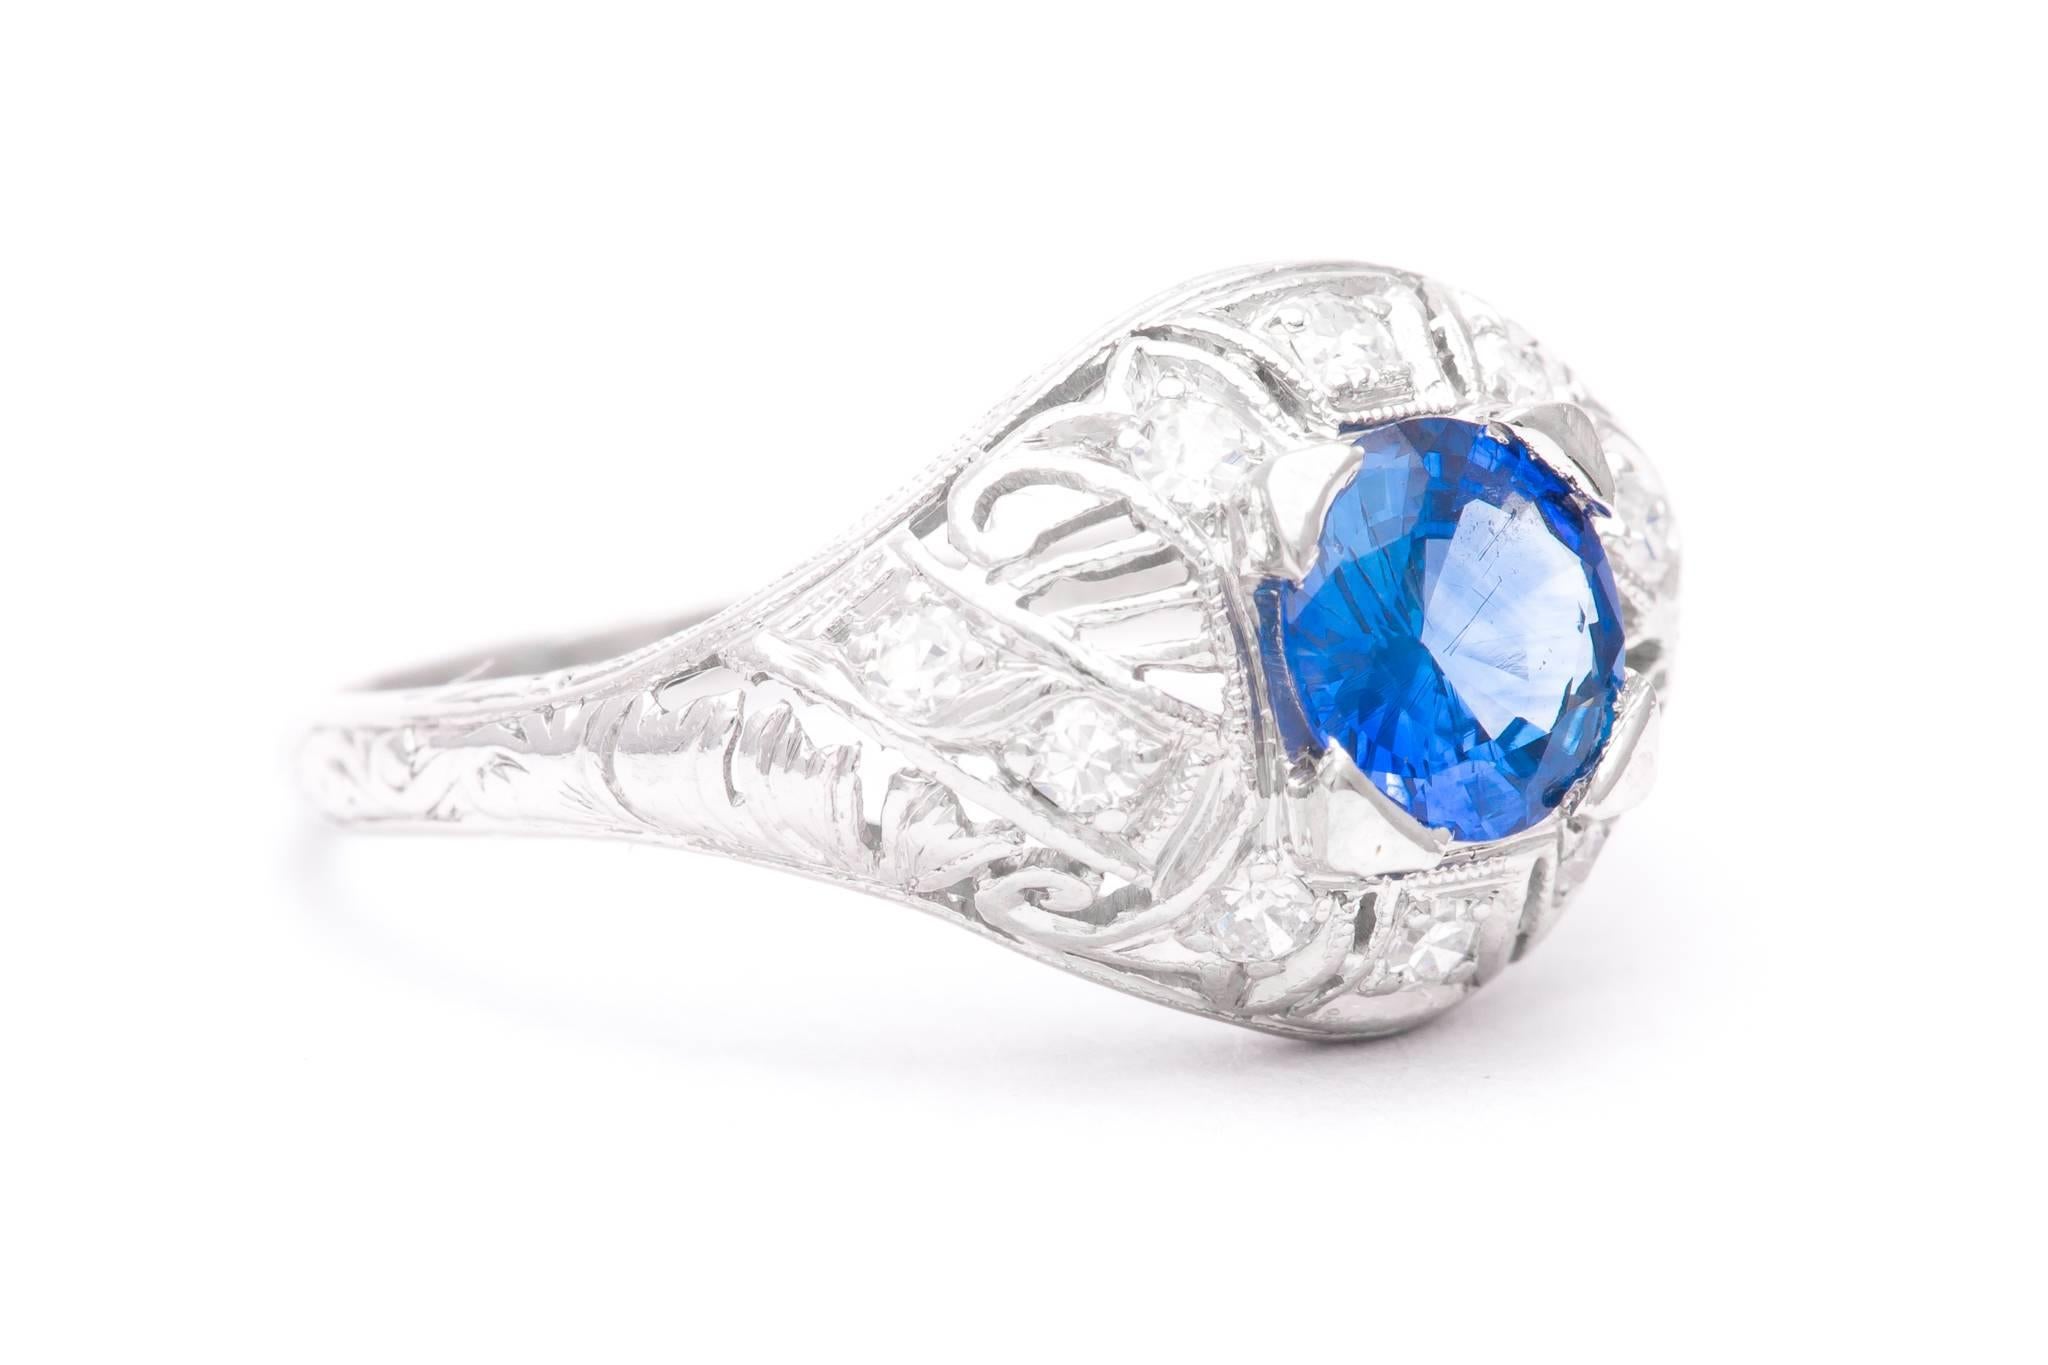 An original art deco period diamond and sapphire filigree ring in luxurious platinum.  Centered by a beautiful rich vivid blue sapphire this ring features elaborate hand pierced filigree work along with hand engraving throughout.

Grading as